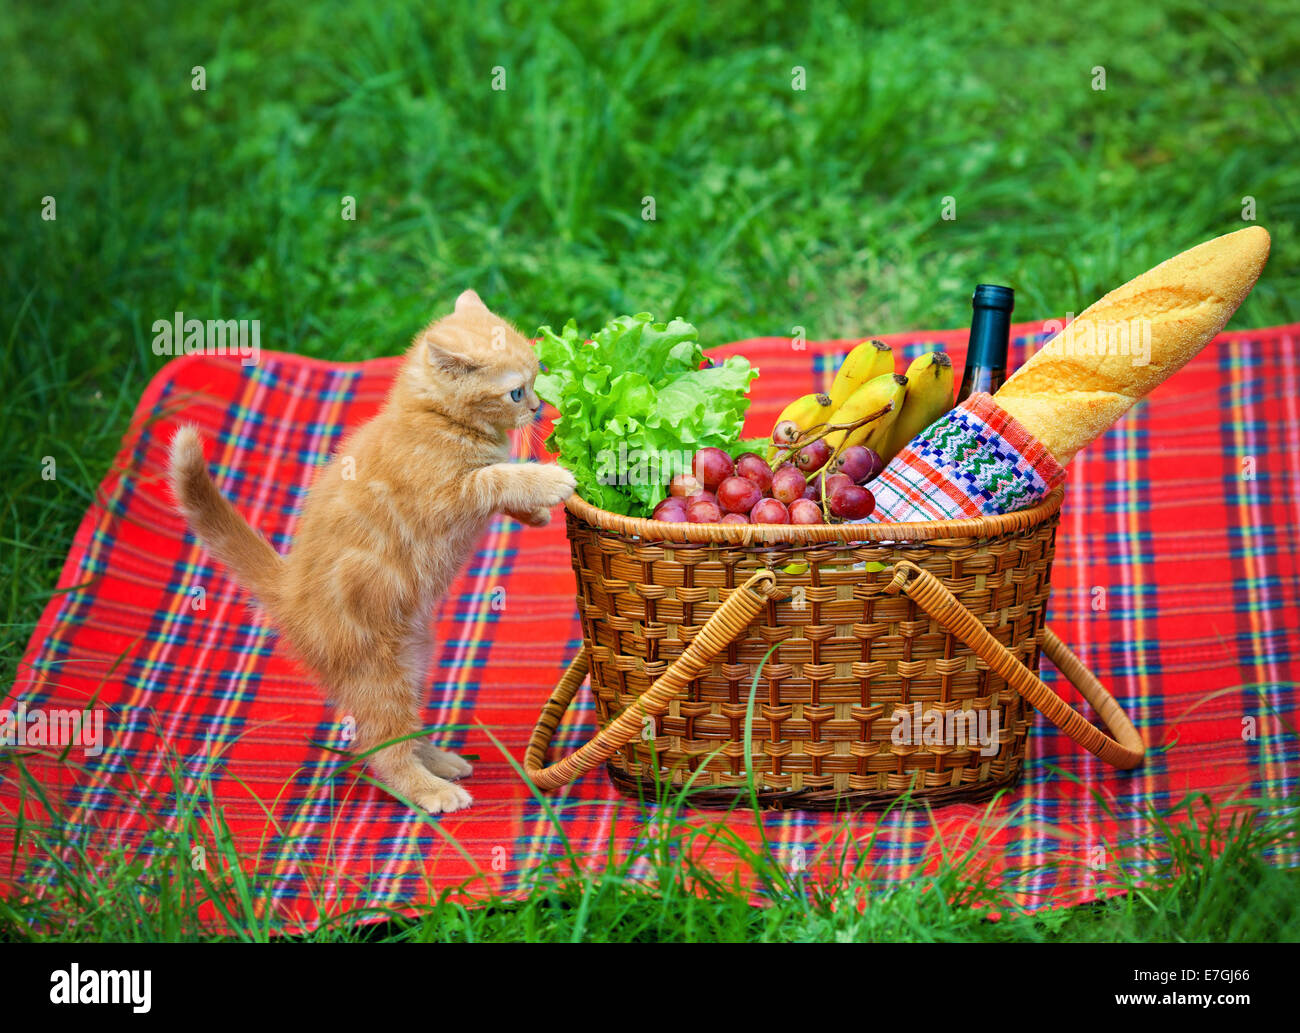 Little kitten sniffing the picnic basket outdoors Stock Photo